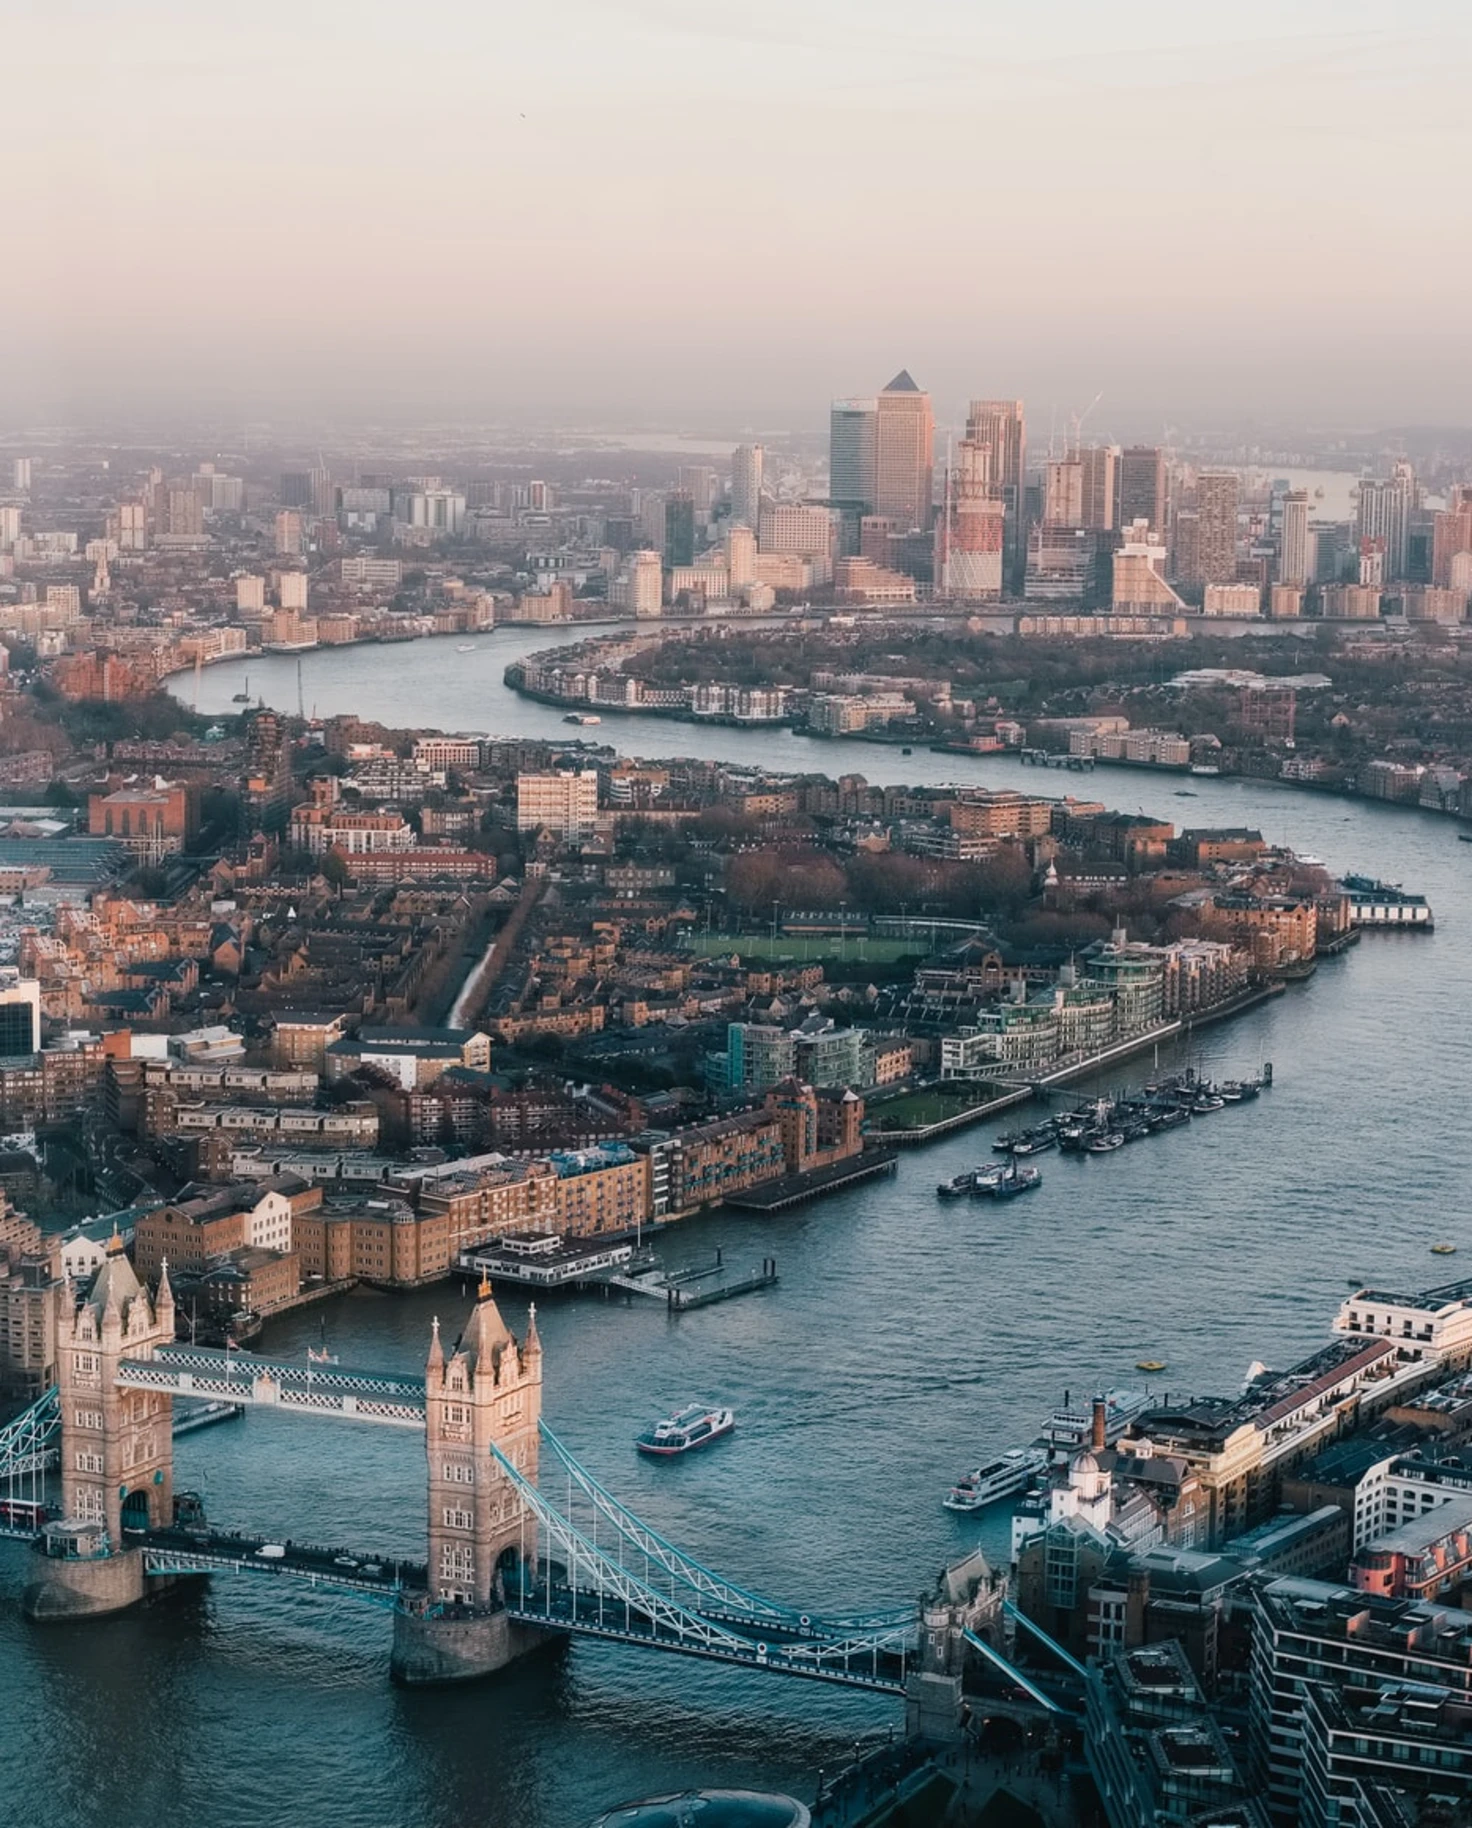 Skyline view of London with river and London bridge